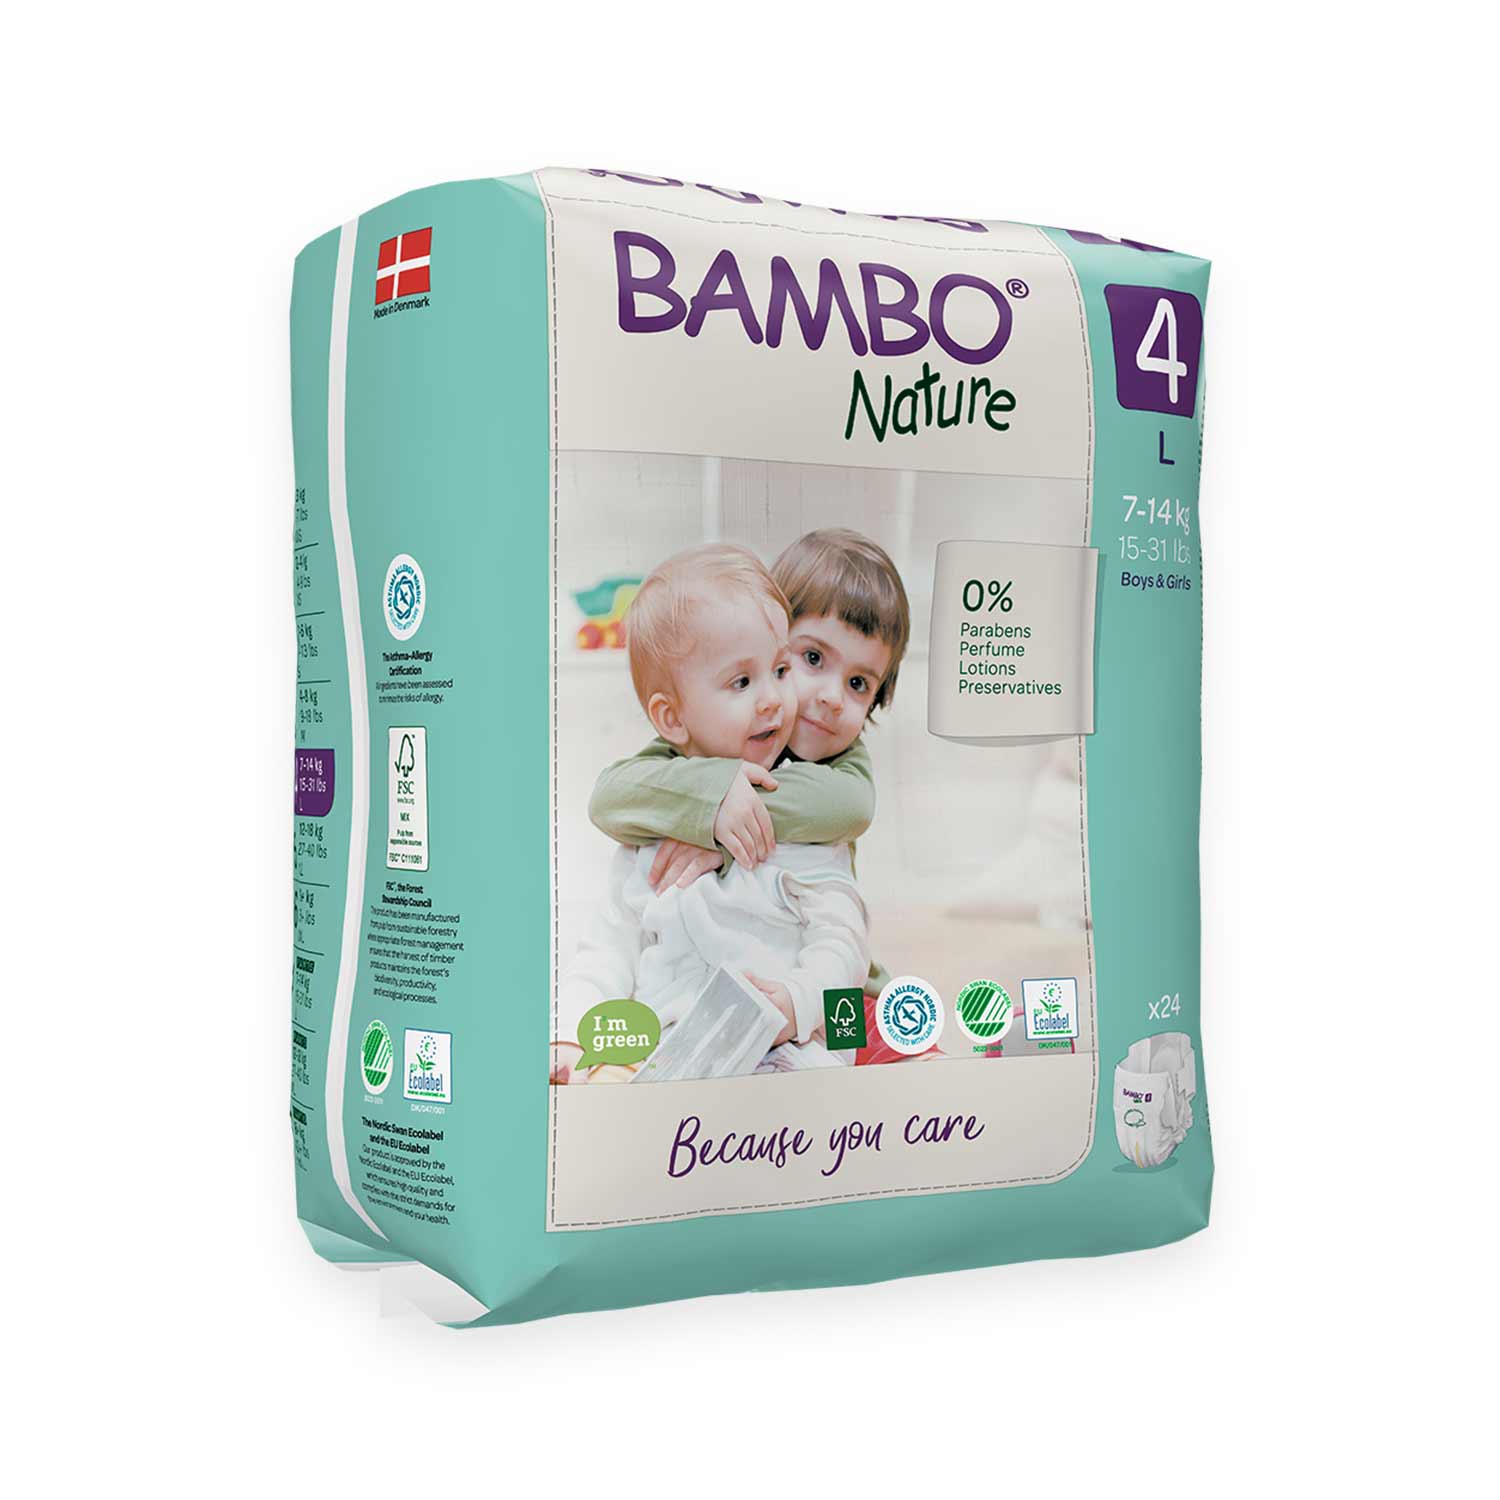 Bambo Nature Bambo Nature Nappies Size 4 (7-14kg) - CT/144 Pads, Diapers And Protectors  